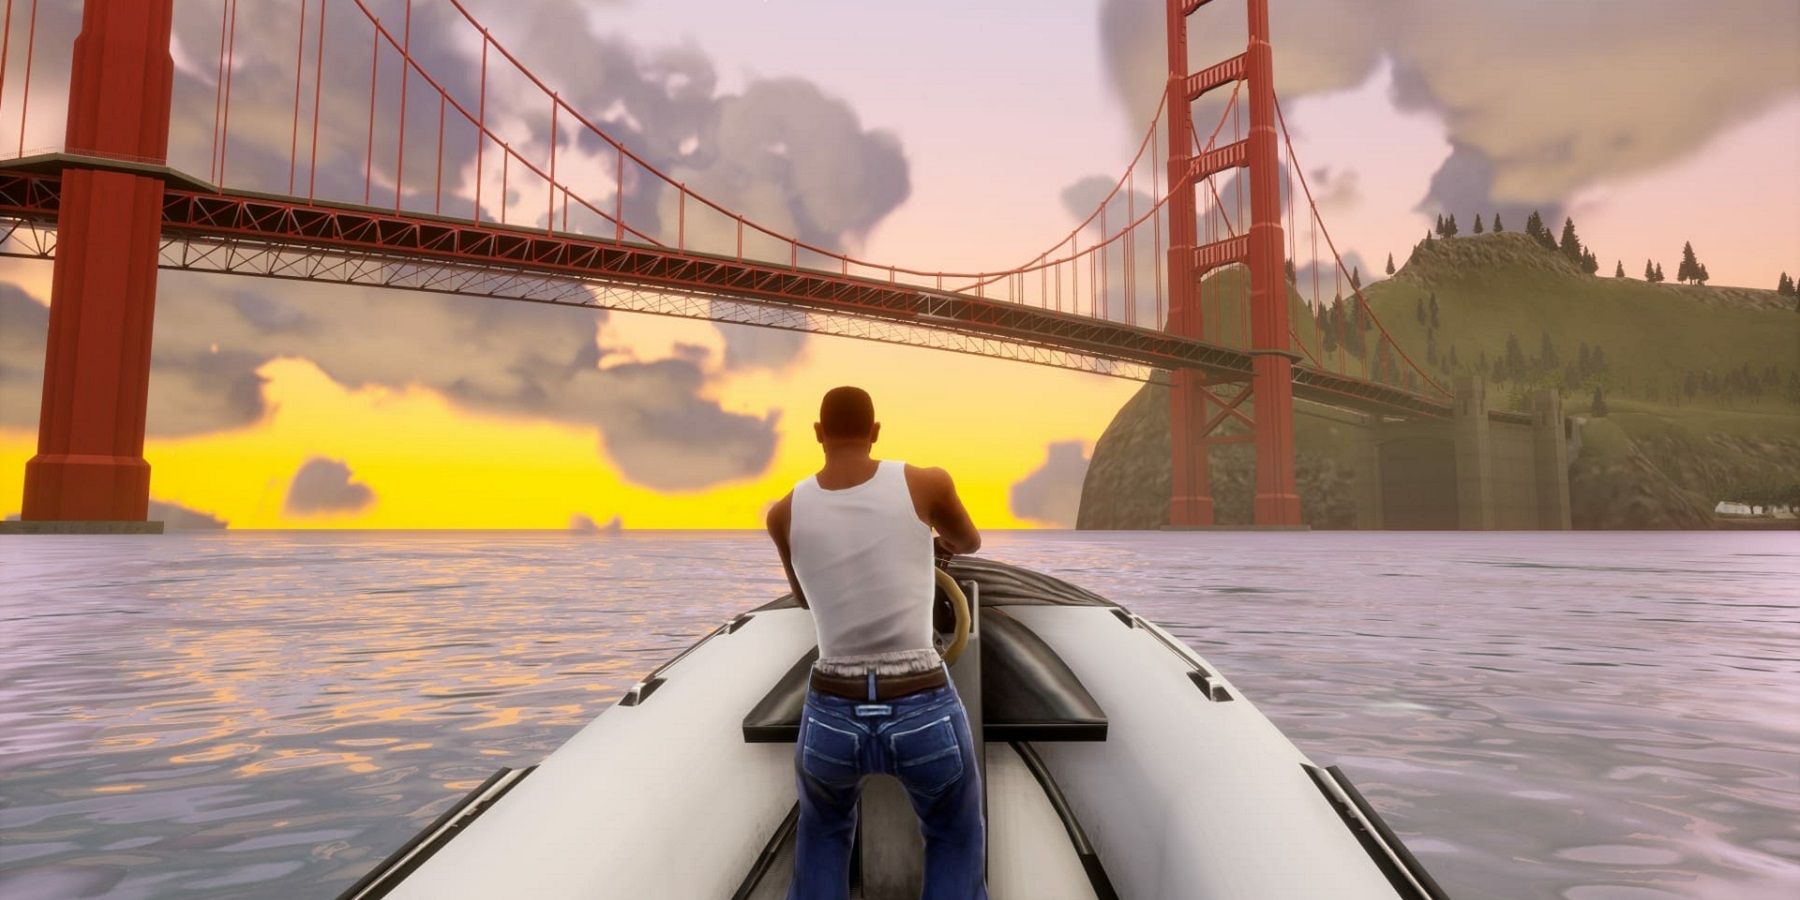 Screenshot from the remastered San Andreas from the GTA Trilogy showing CJ riding on a speedboat down a river.